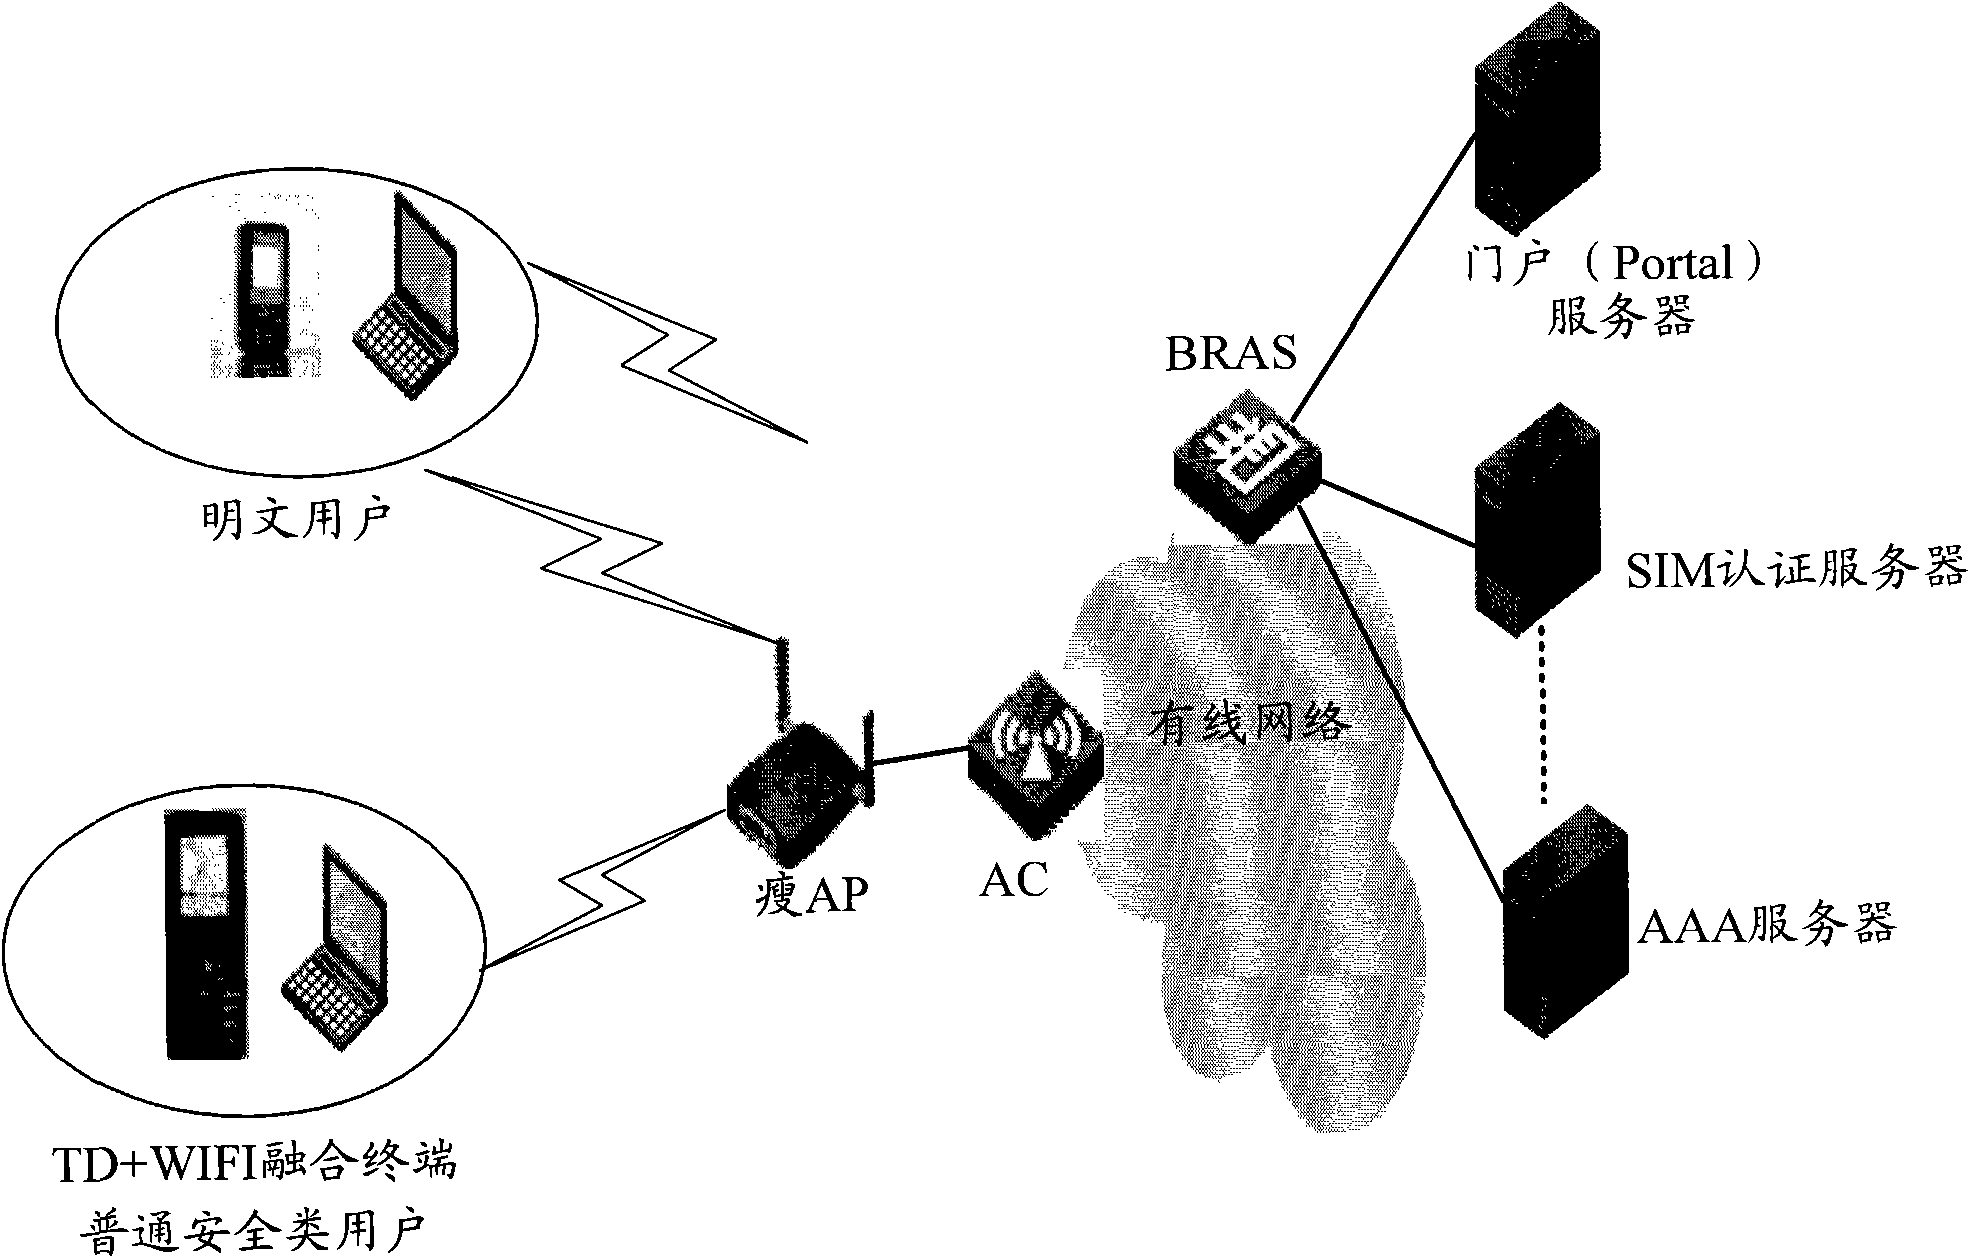 Method for carrying out 802.1X authentication cross equipment, access equipment and access control equipment